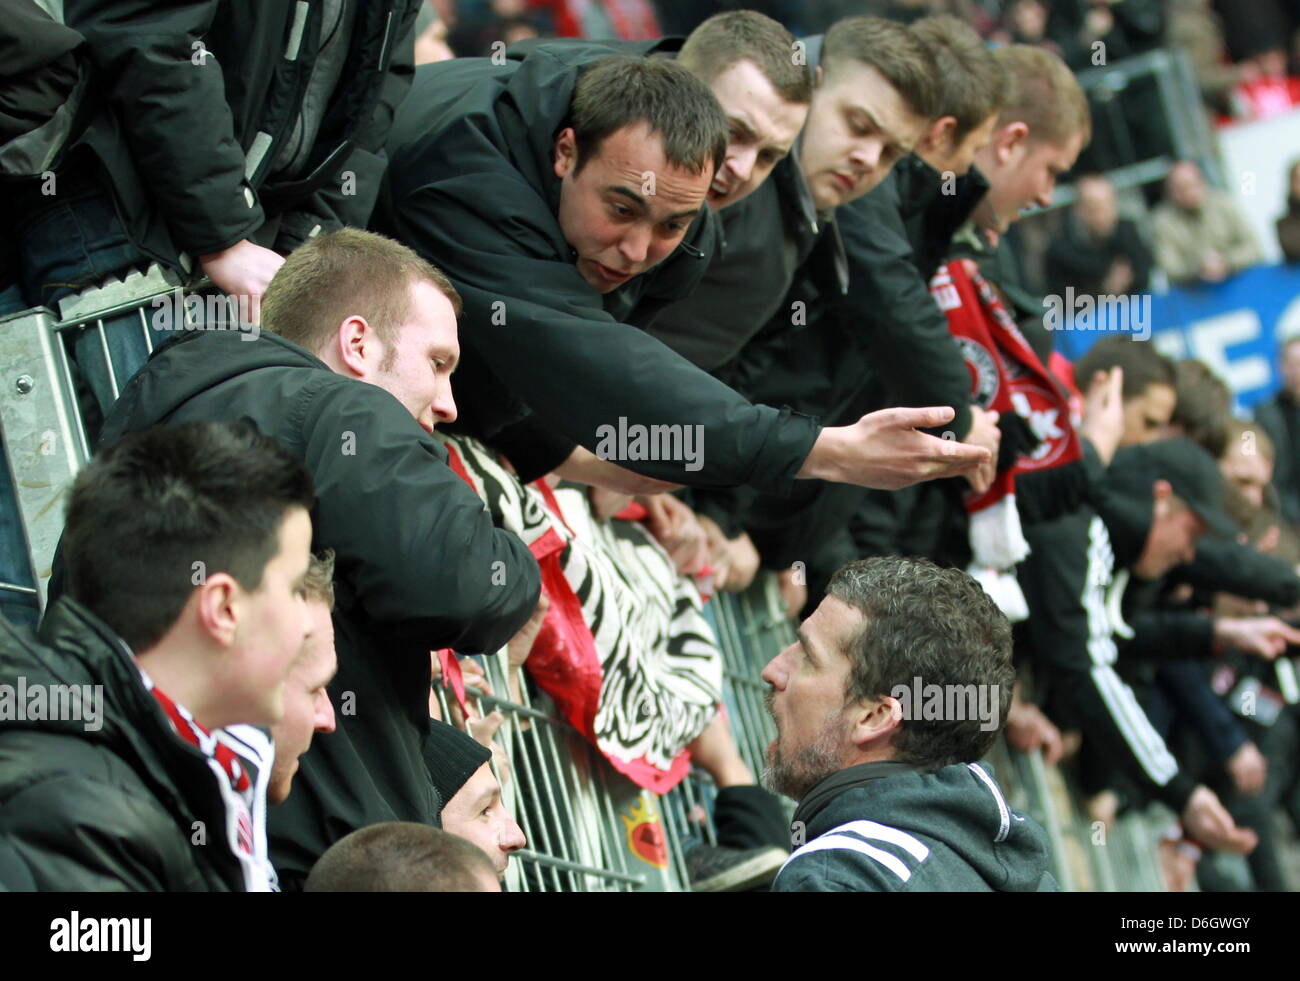 Kaiserslautern's head coach  Marco Kurz (R) talks to the fans after the German Bundesliga match between 1. FSV Mainz 05 and 1. FC Kaiserslautern at the Coface Arena in Mainz, Germany, 25 February 2012. Kaiserslautern lost 4-0. Photo: ROLAND HOLSCHNEIDER  (ATTENTION: EMBARGO CONDITIONS! The DFL permits the further utilisation of the pictures in IPTV, mobile services and other new te Stock Photo